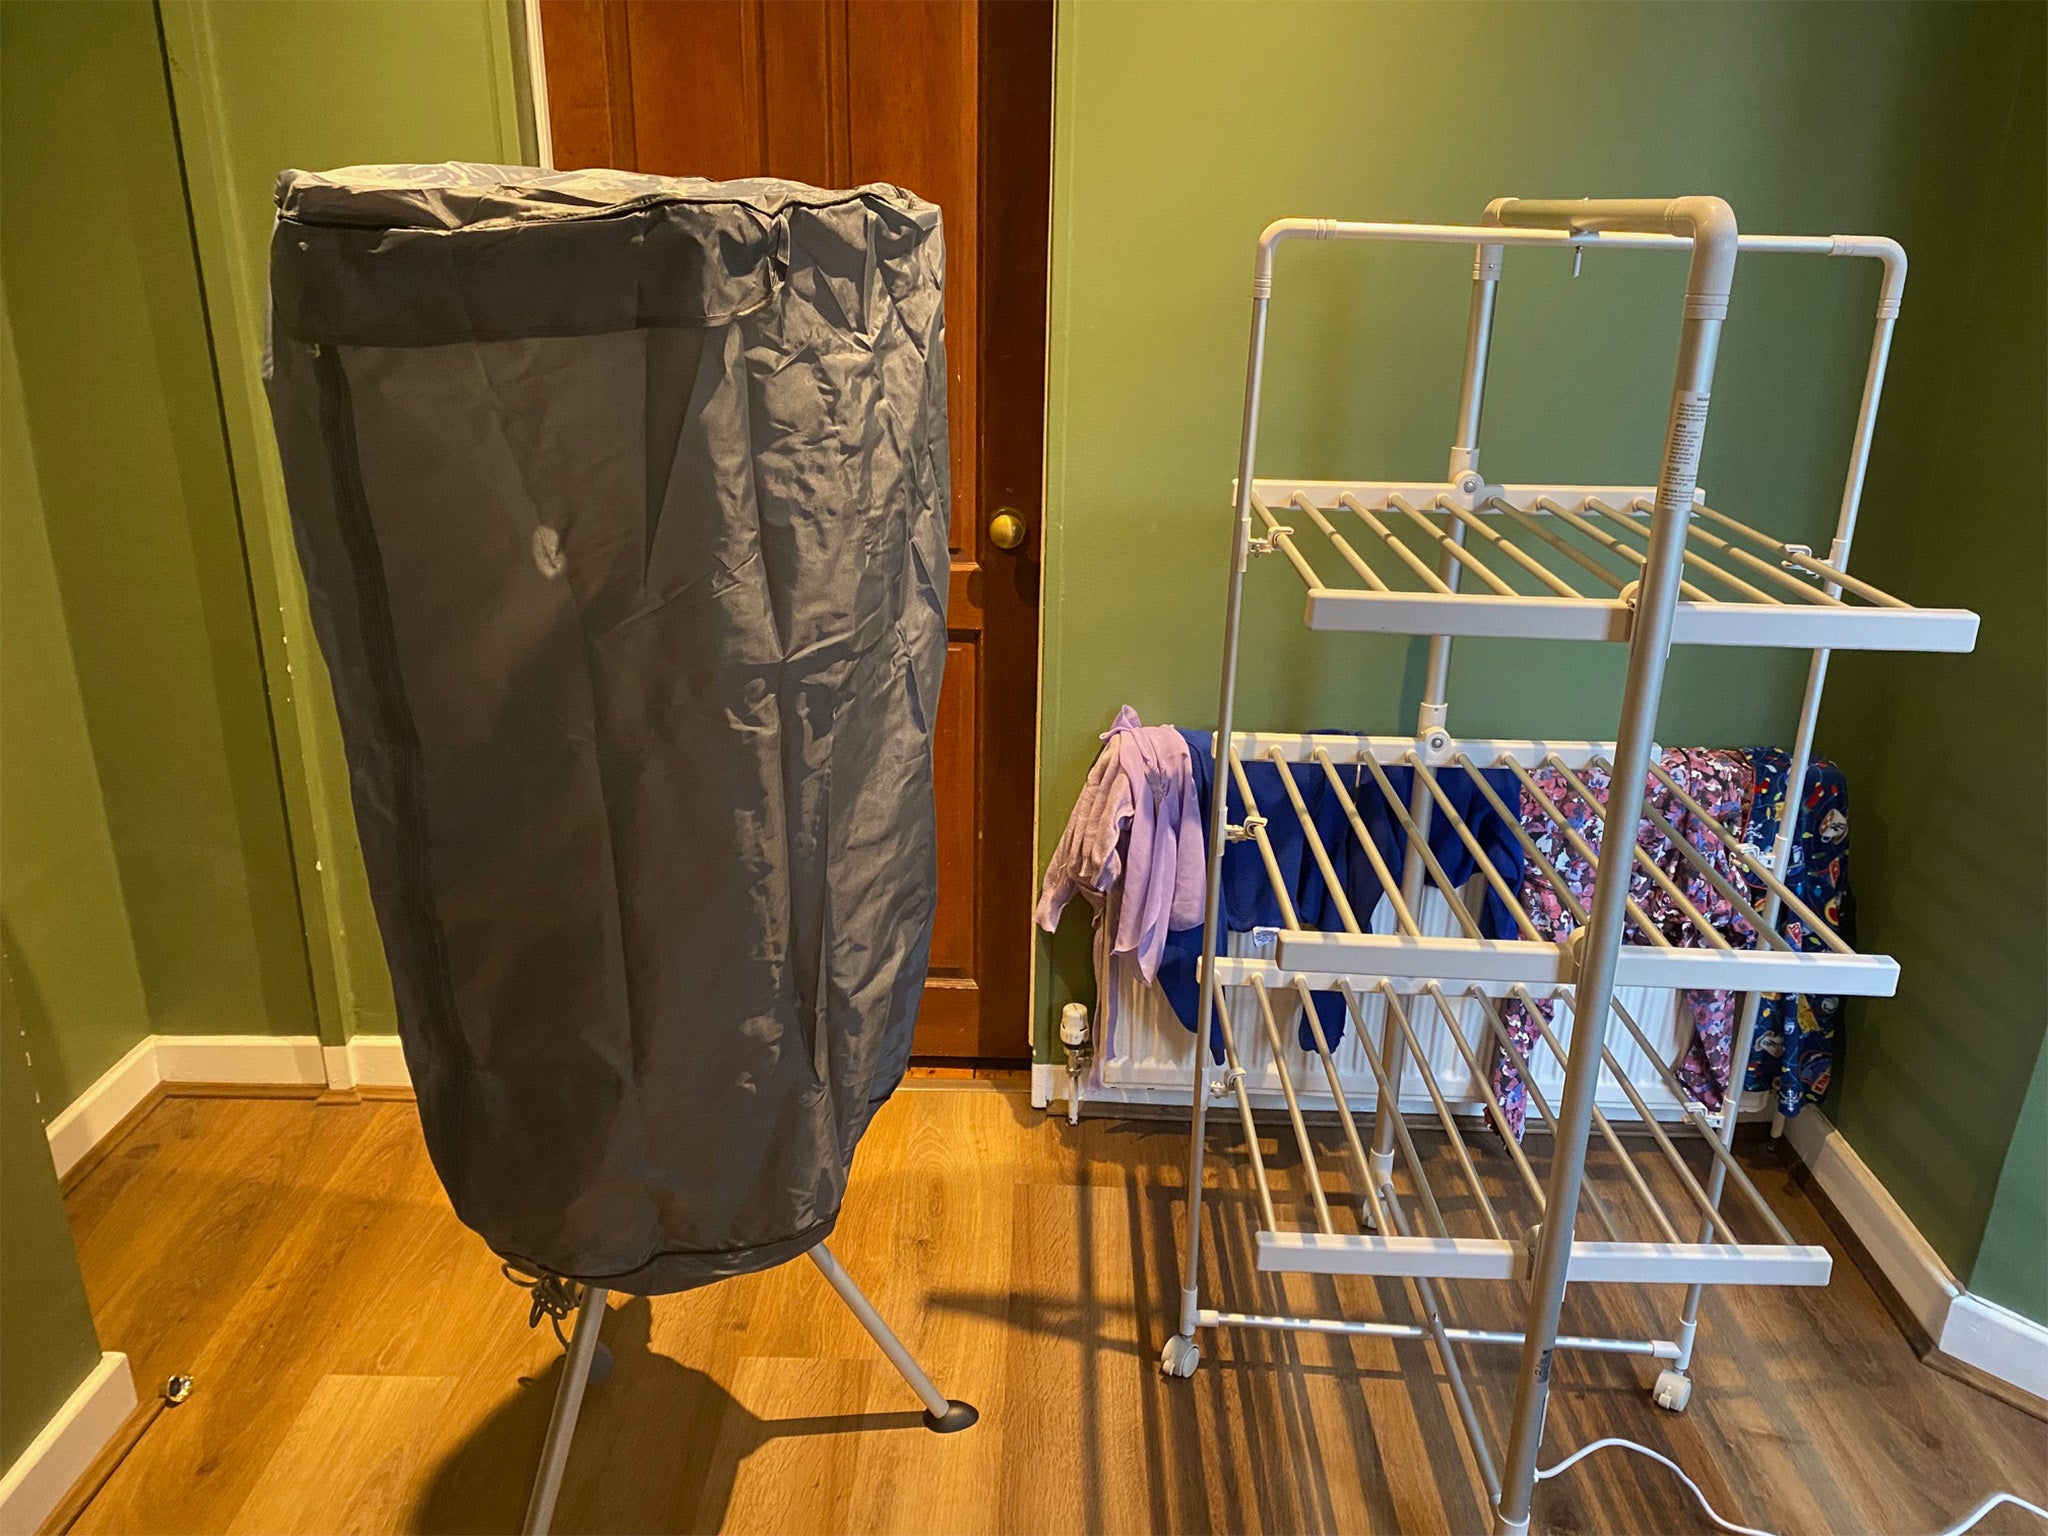 Running a heated clothes airer costs between an estimated 10p and 20p an hour